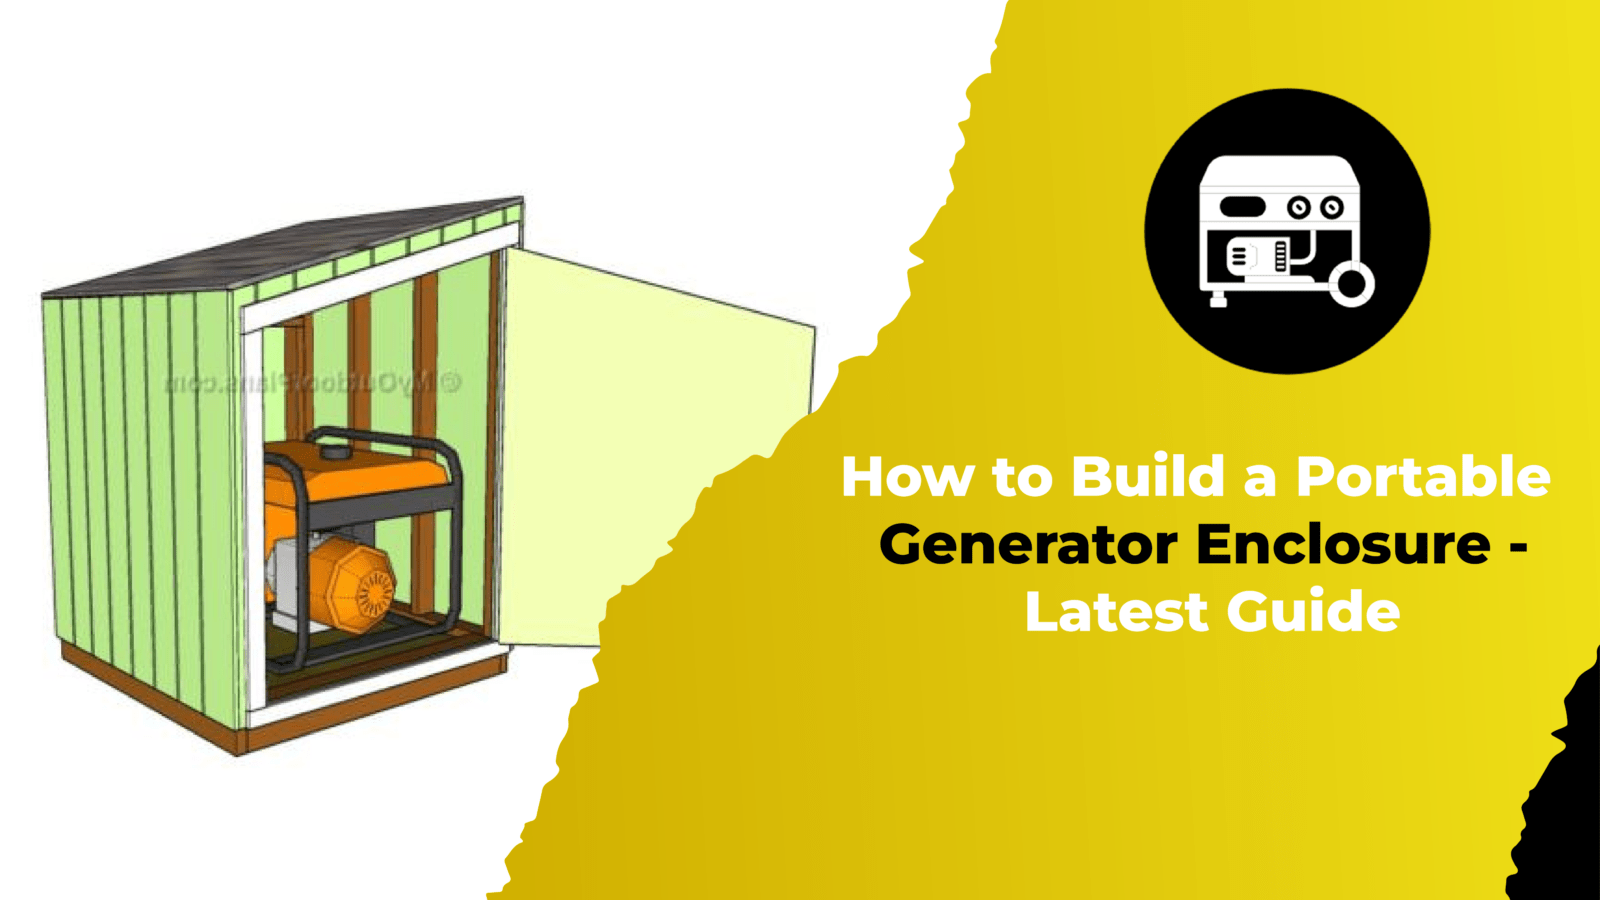 How to Build a Portable Generator Enclosure - Latest Guide